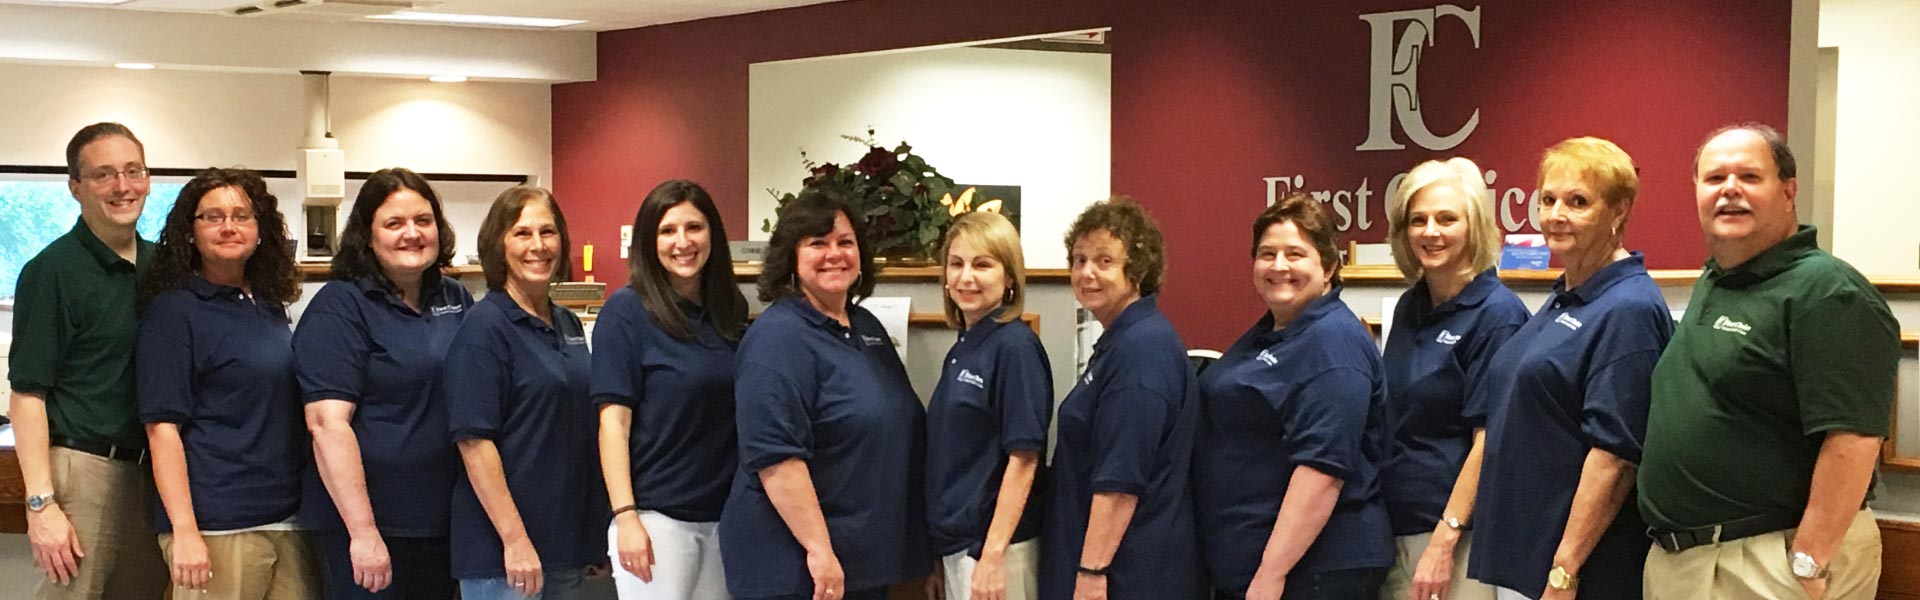 The staff and family of First Choice Federal Credit Union of New Castle in Pennsylvania